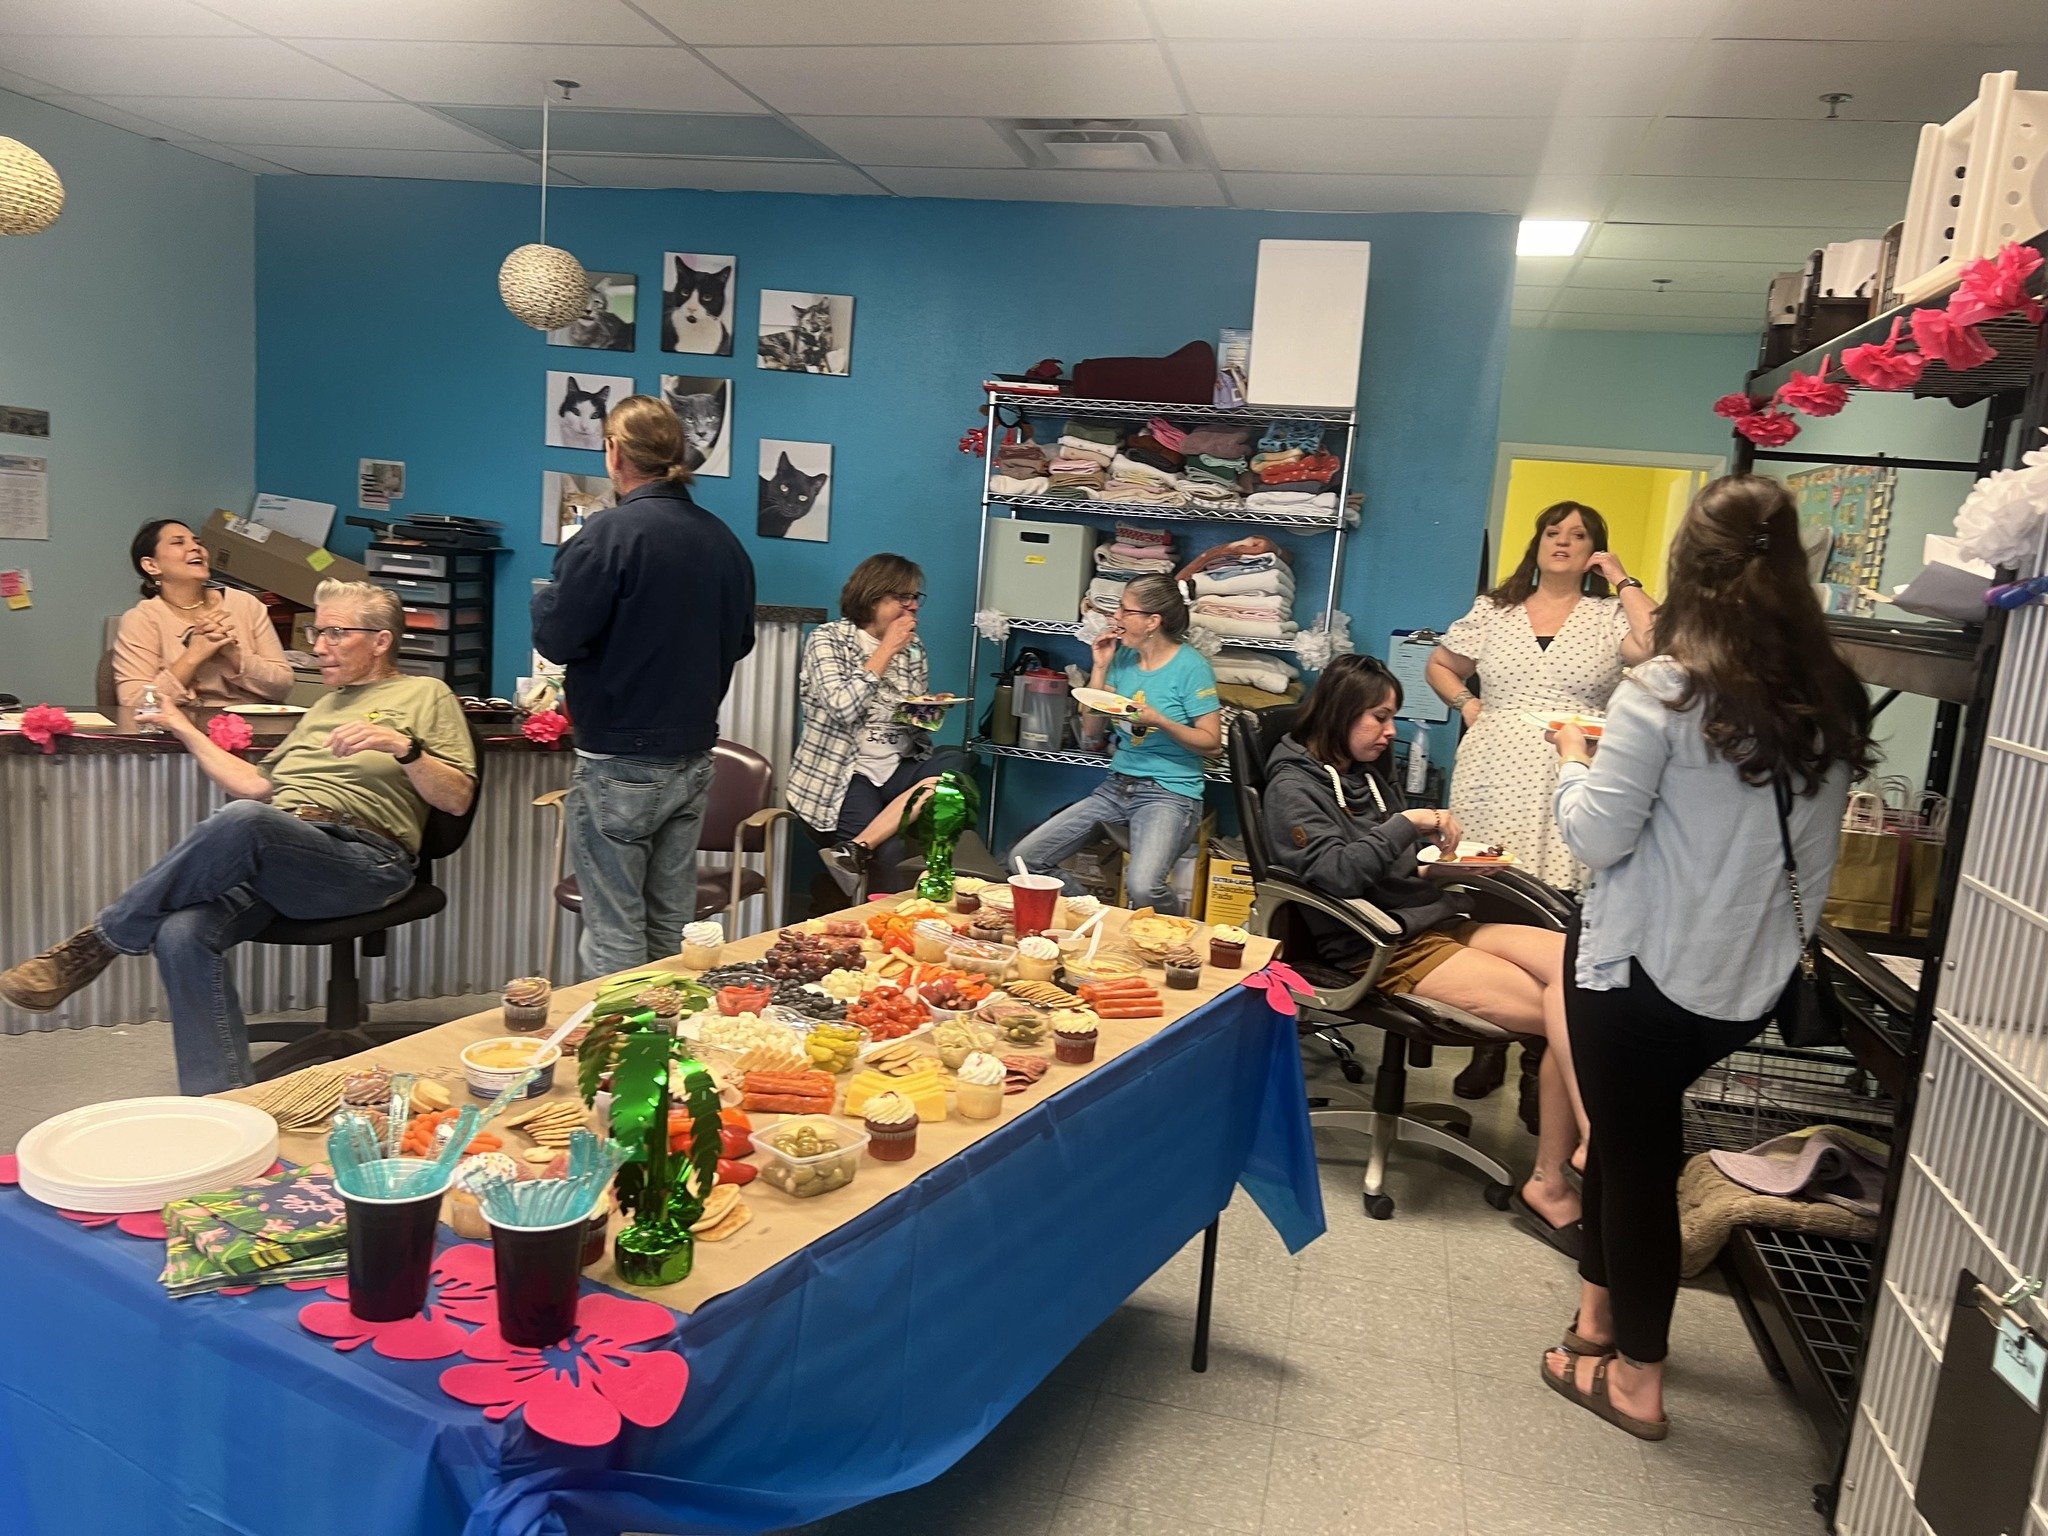 We can't believe it's already been two weeks since our Volunteer Mixer! HUGE thank you to everyone who could attend - we had a great time rubbing elbows with y'all. We had snacks, door prizes, and a demonstration with our Drop Trap to show folks how 